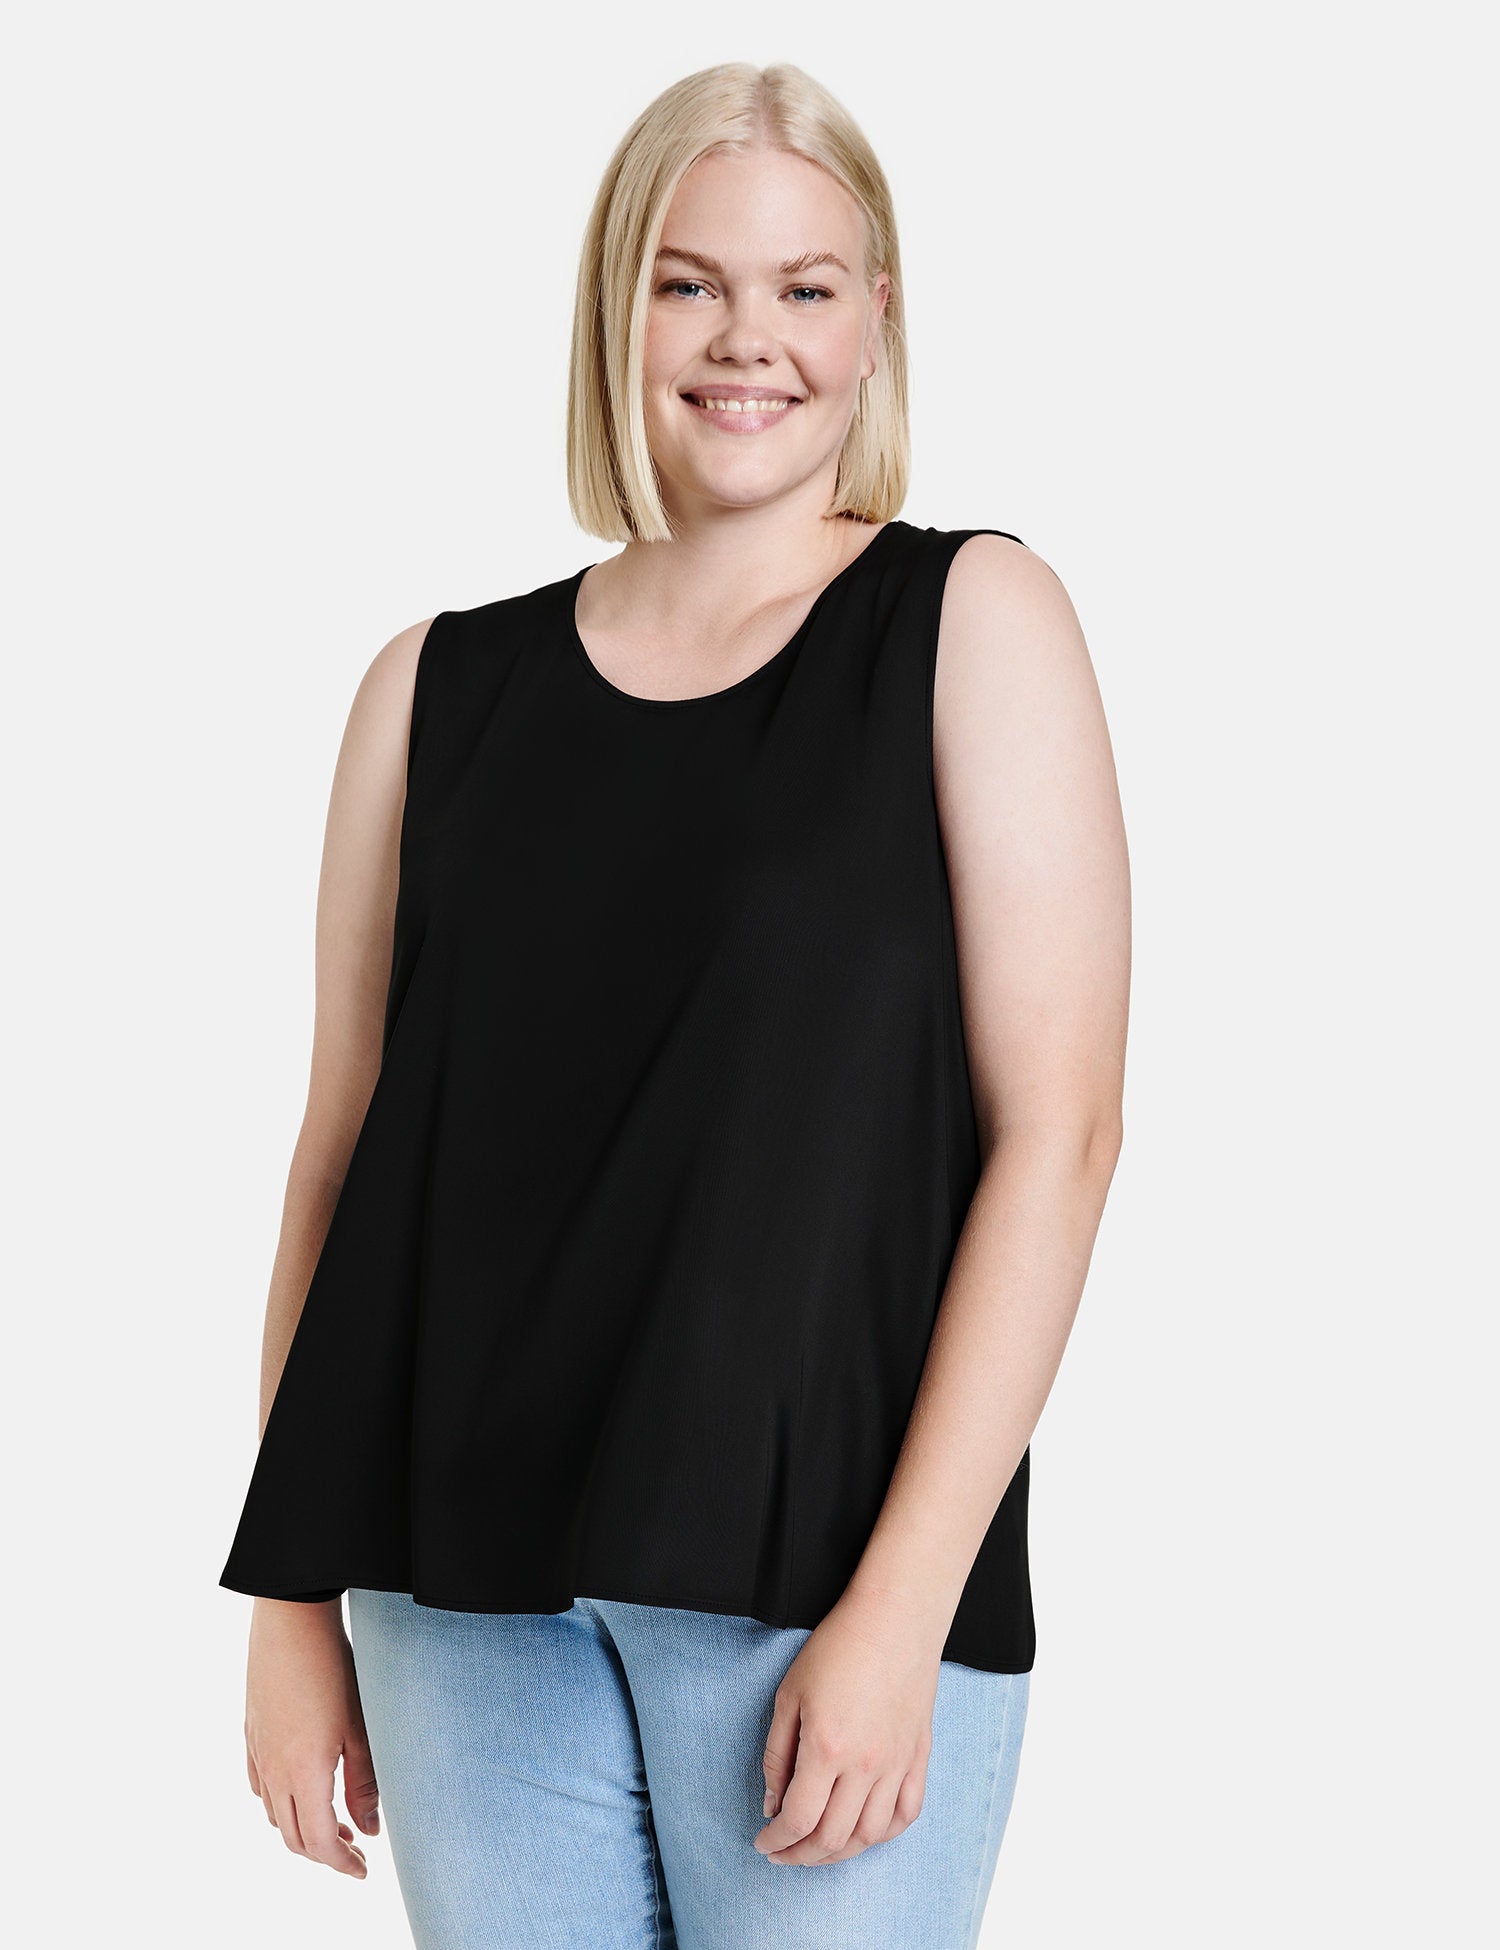 Blouse Top With Side Slits_960994-29141_1100_04